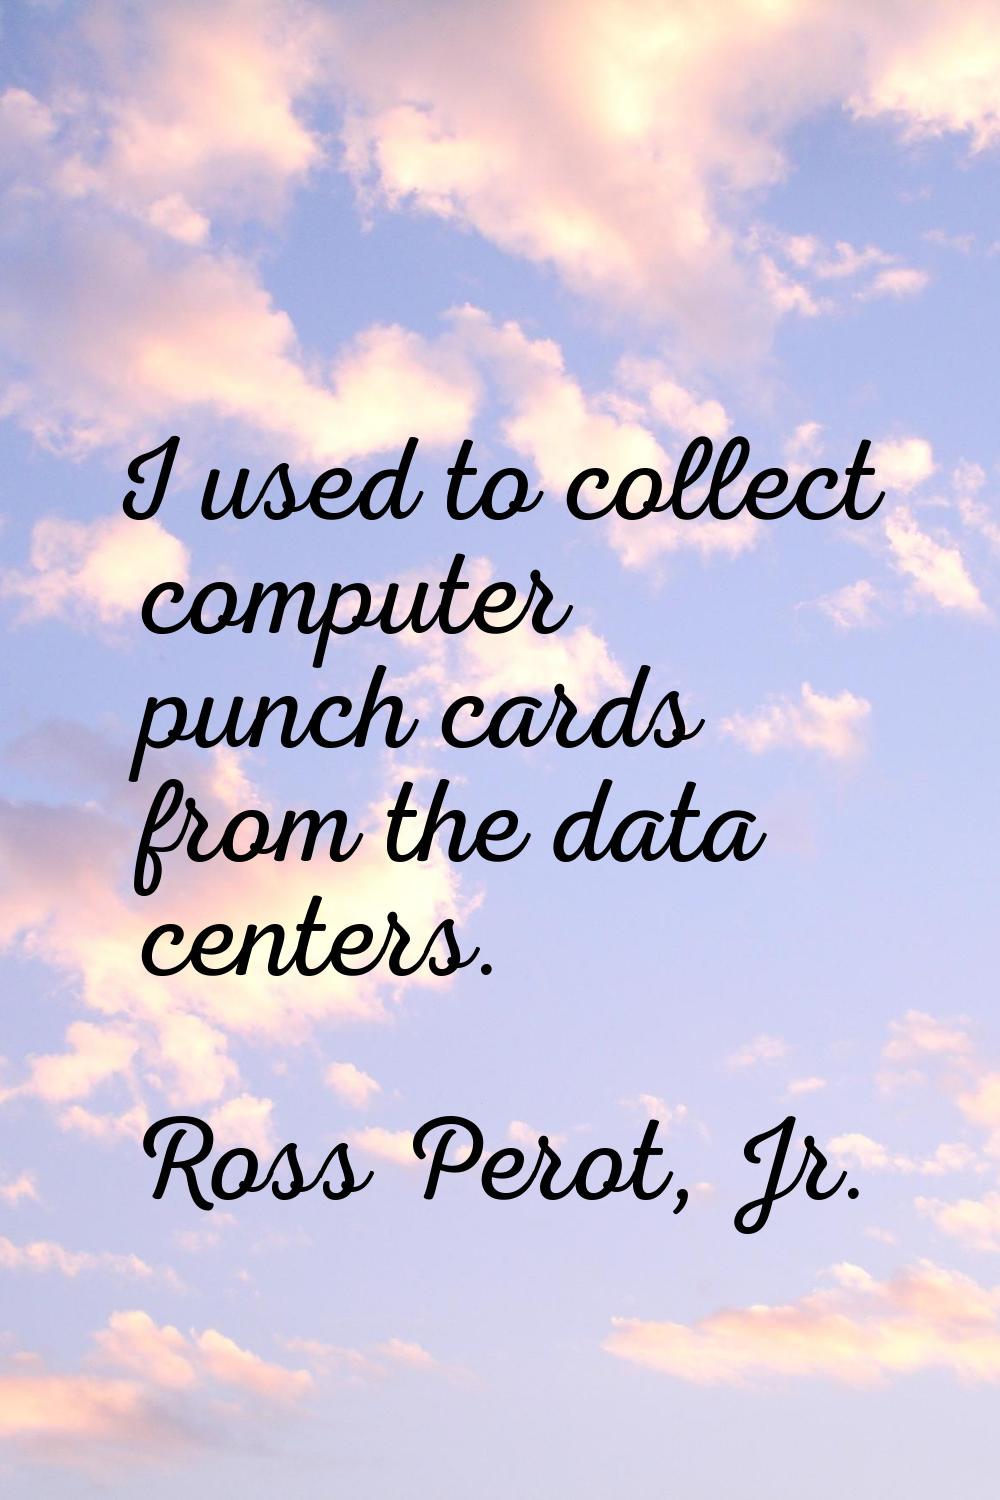 I used to collect computer punch cards from the data centers.